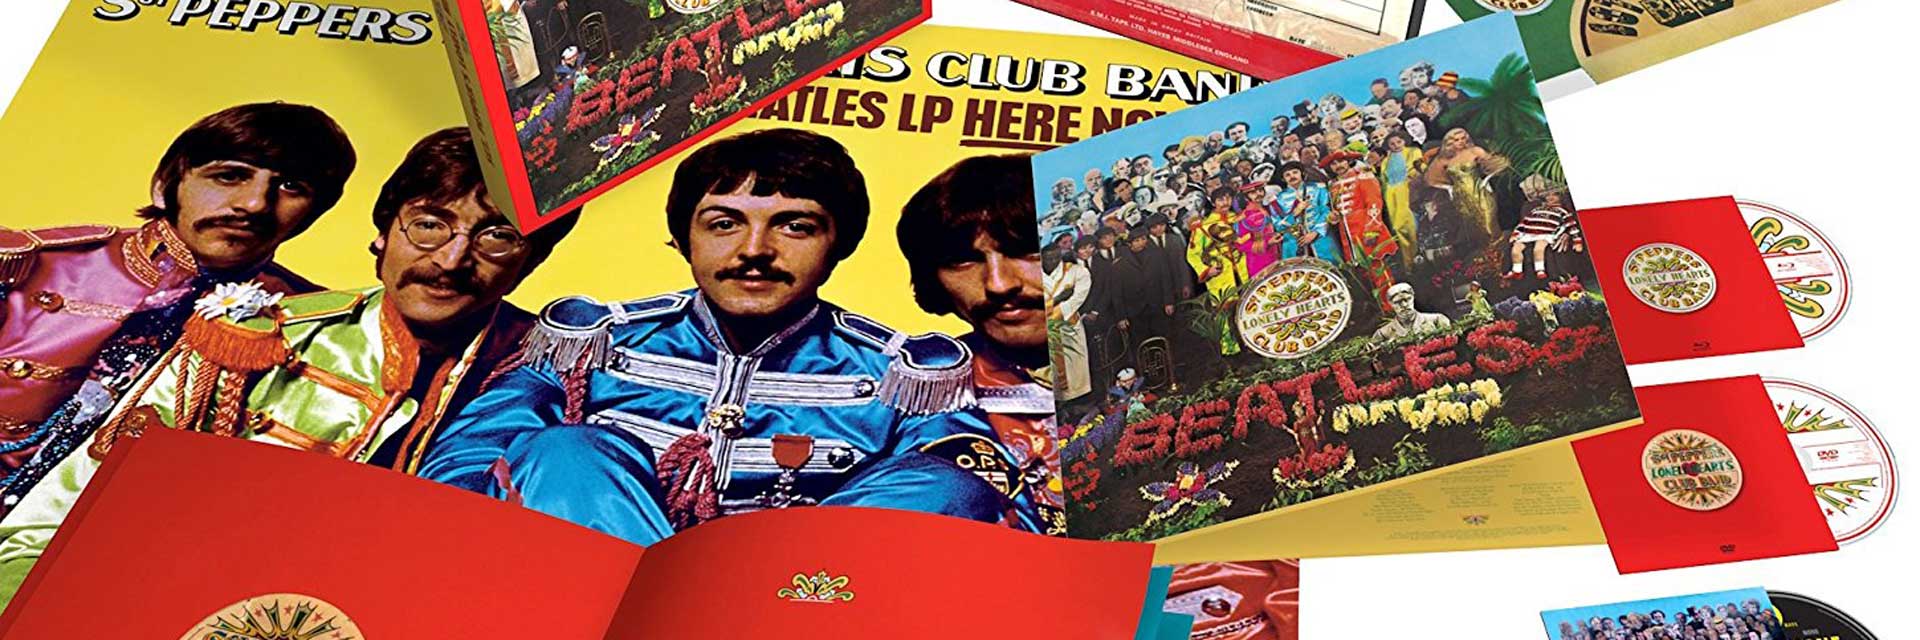 The Beatles - Sgt. Pepper's Lonely Hearts Club Band - Fidelity Magazine